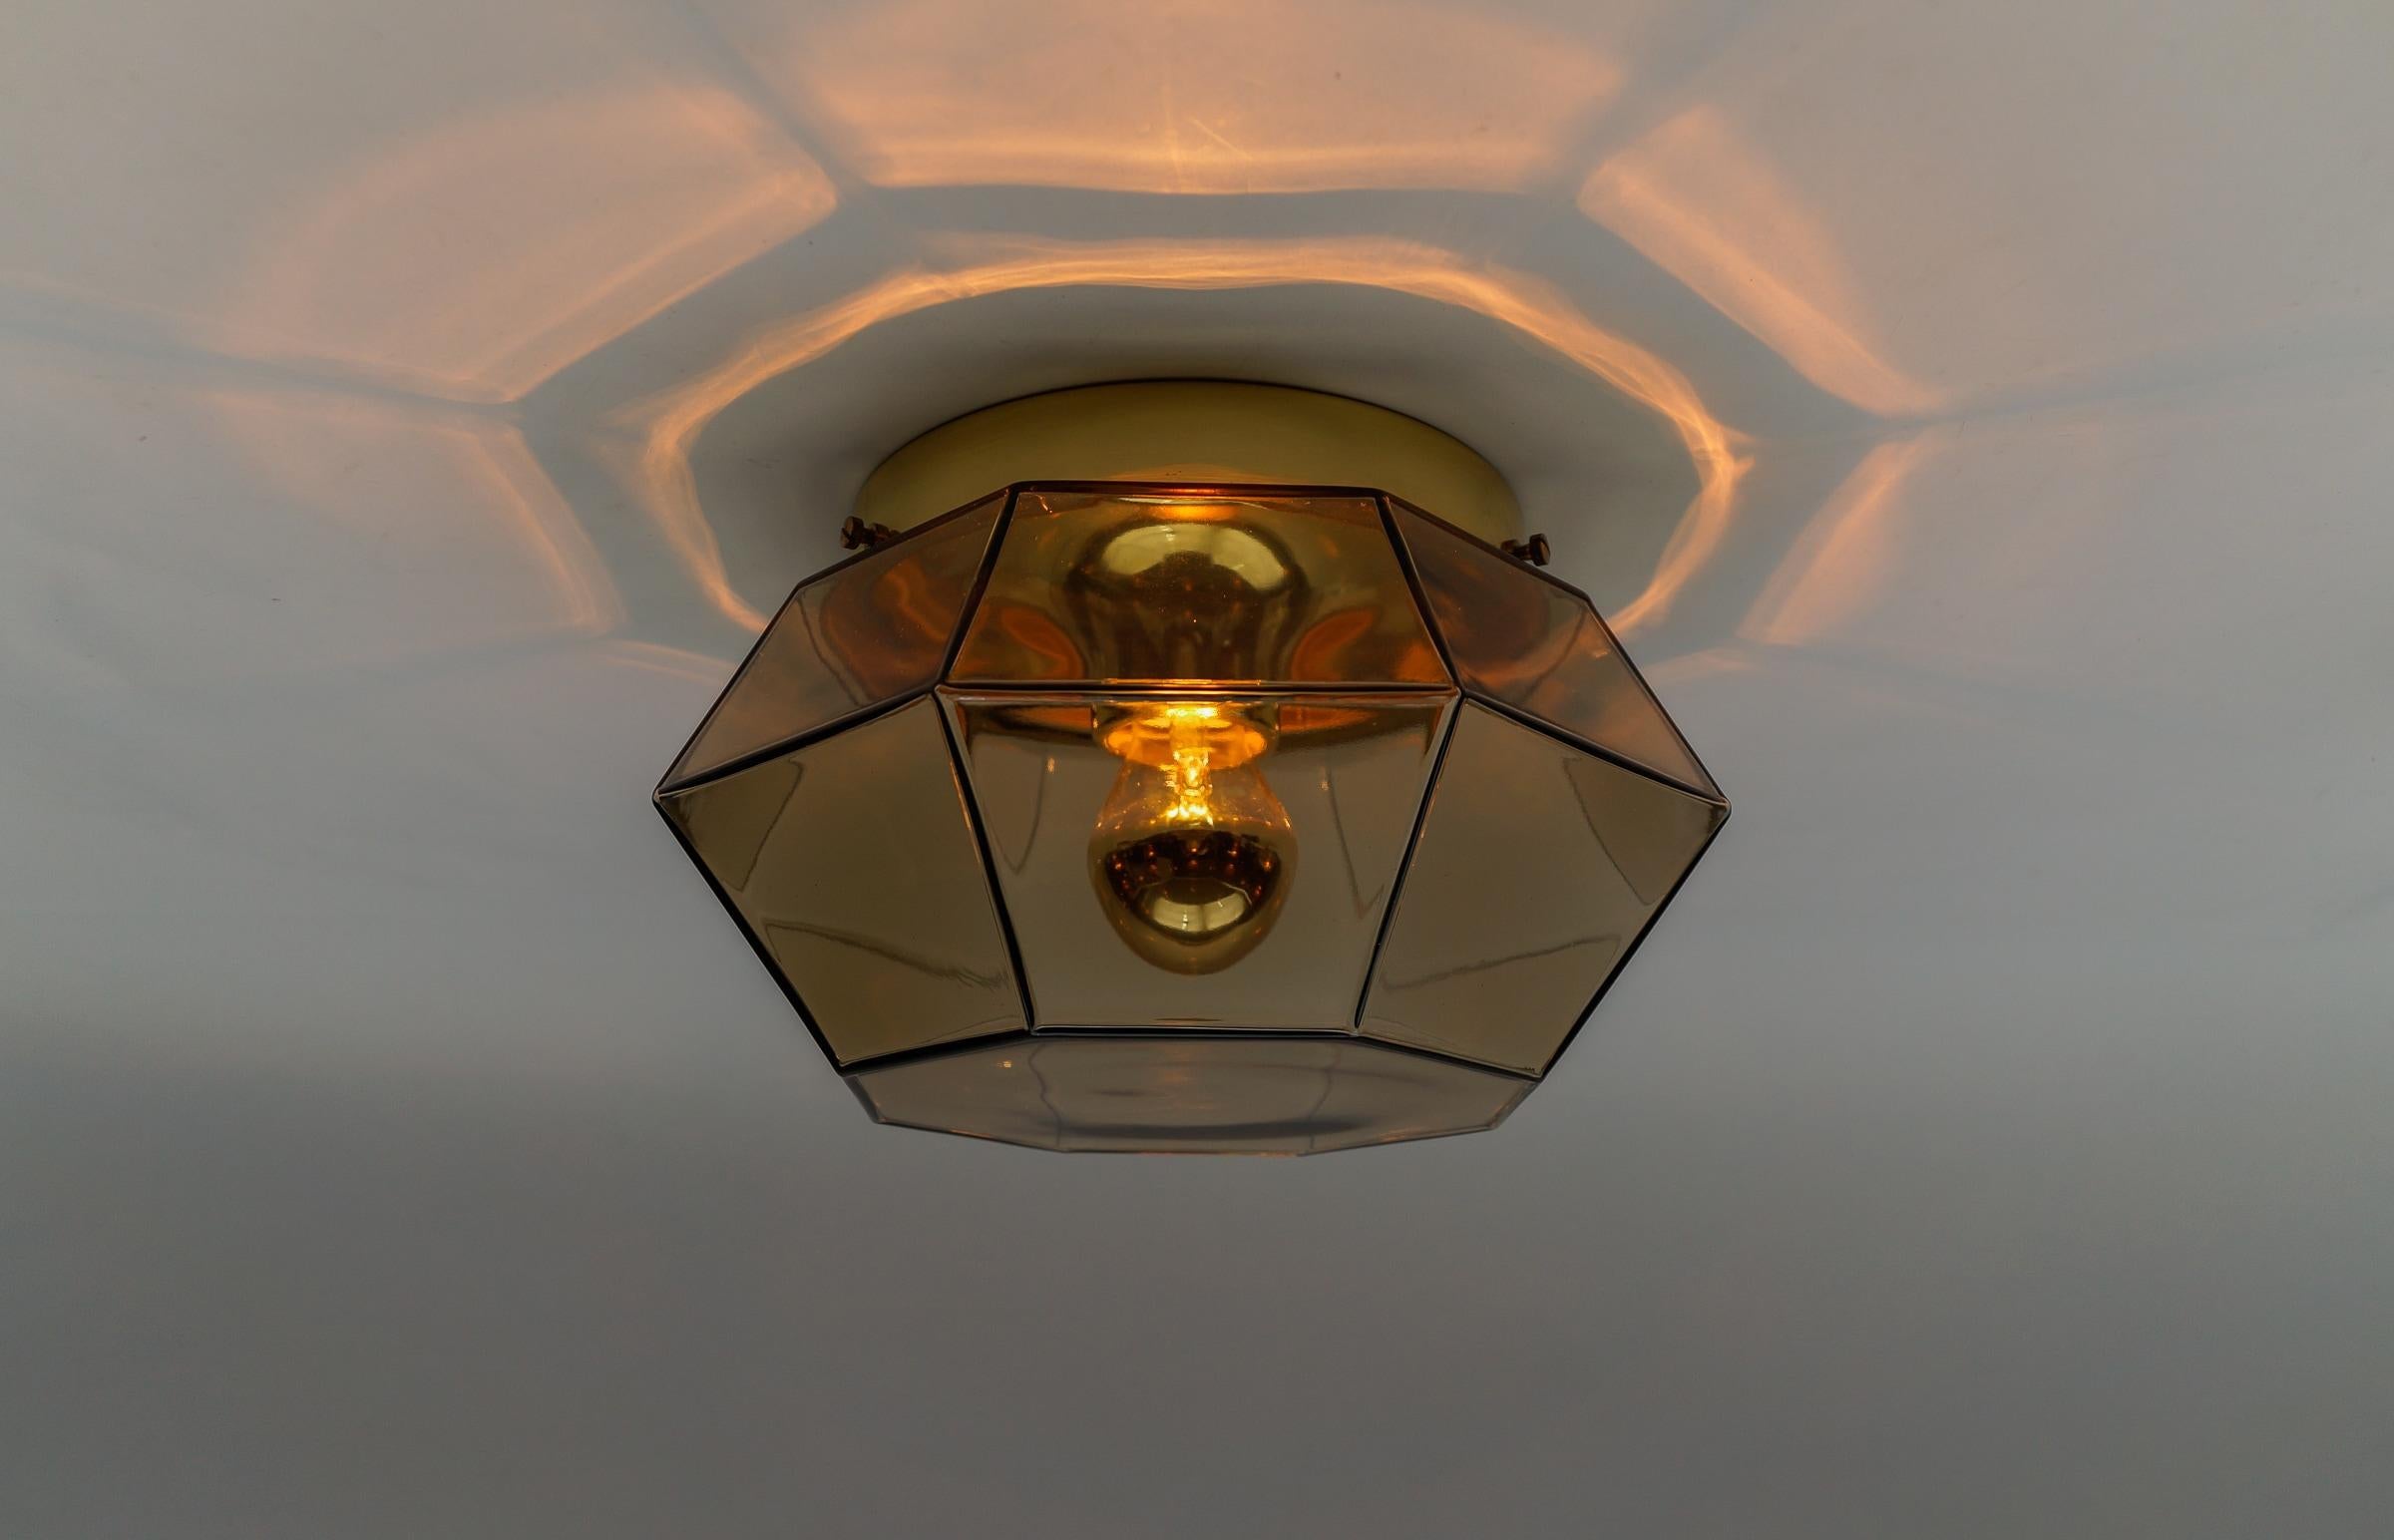 Gold and Smoked Glass Flush Mount by Limburg, Germany 1960s

Octagonal shaped lantern and multifaceted clear glass.

Dimensions
Height: 7.09 in. (18 cm)
Width: 11.81 in. (30 cm)

The fixture need 1 x E27 standard bulb with 60W max.

Light bulbs are